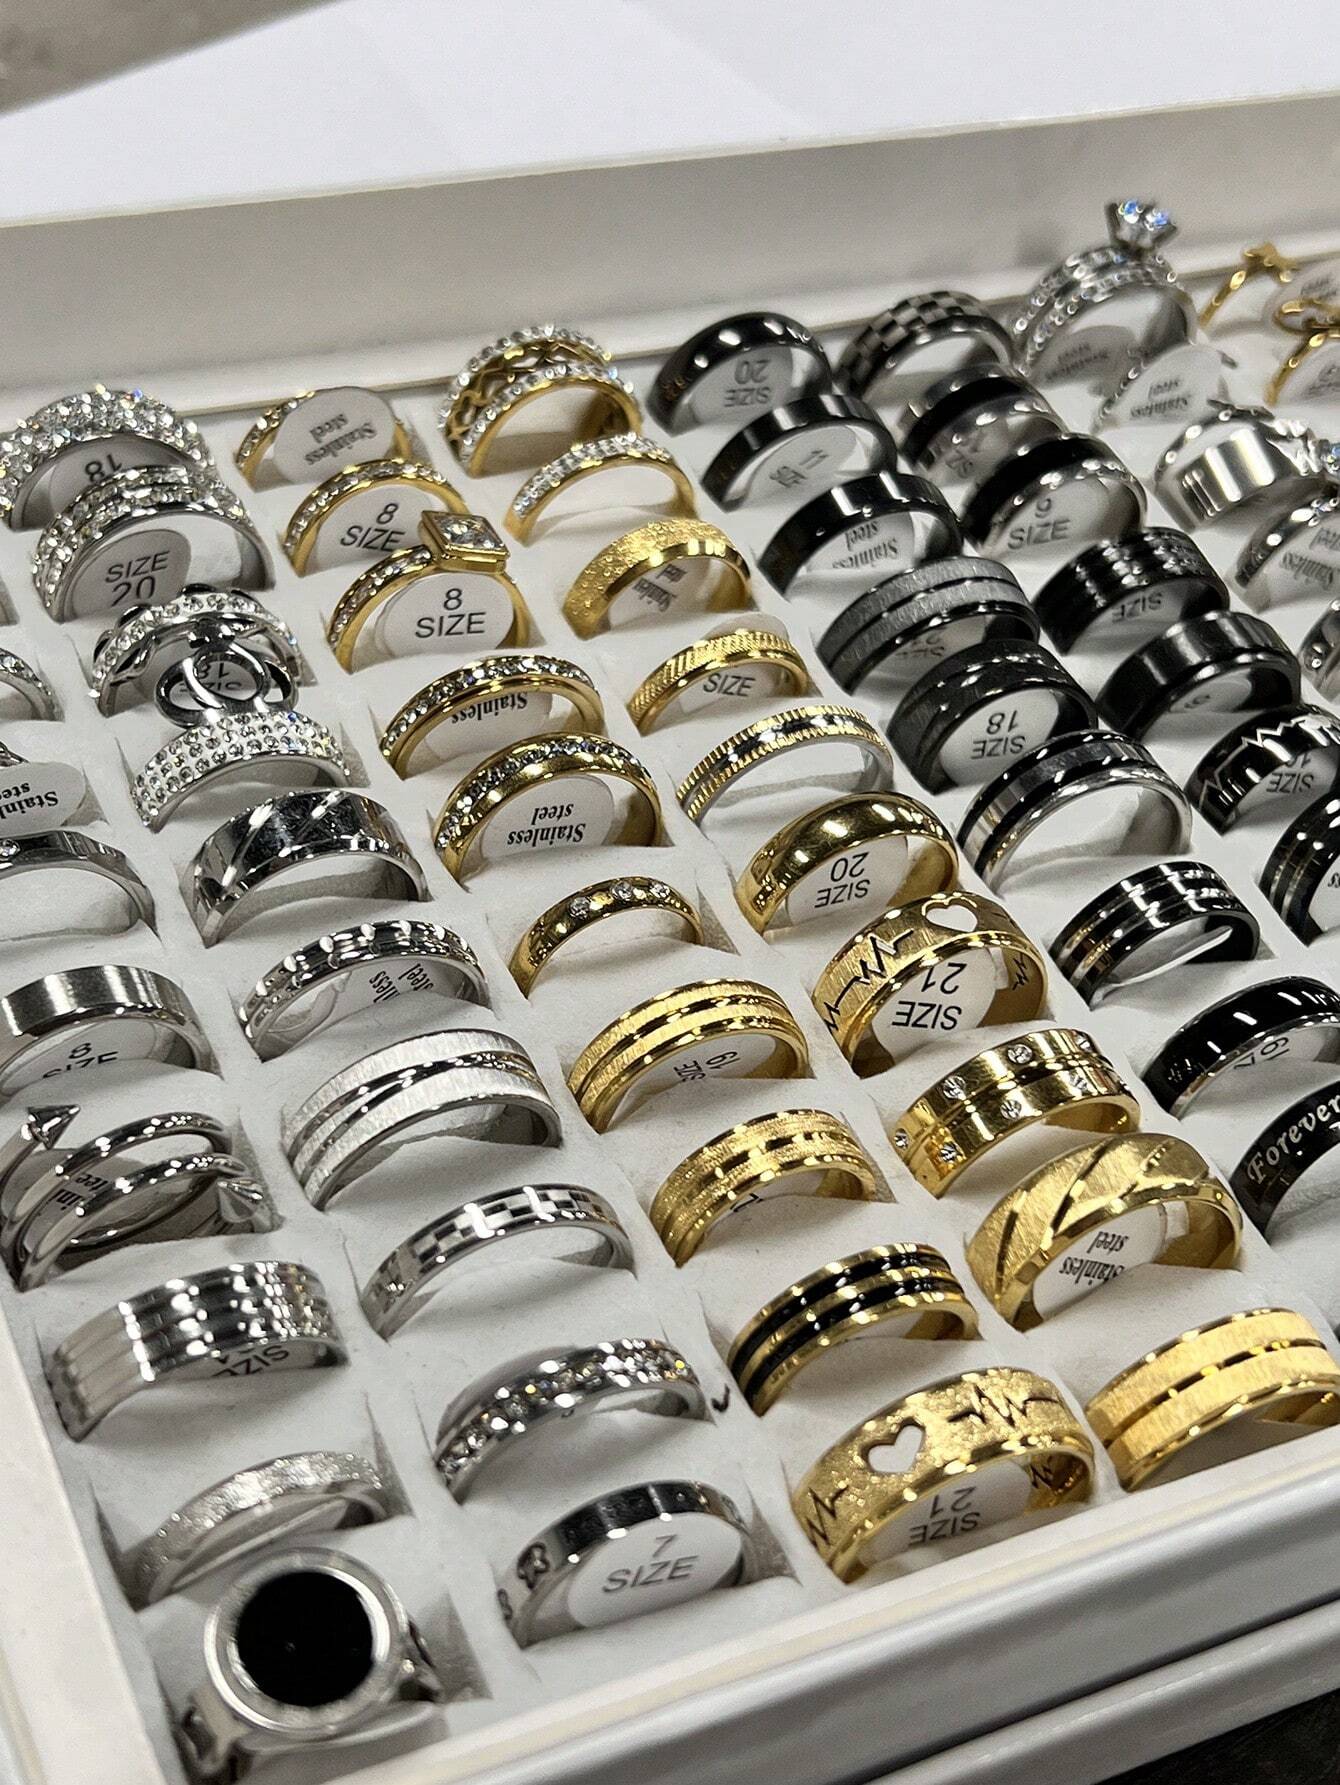 80pcs/set Fashionable Stainless Steel Mixed Design Ring Set In Blind Box, Suitable For Daily Decor Or Gift (random Size And Style Of 80 Rings)